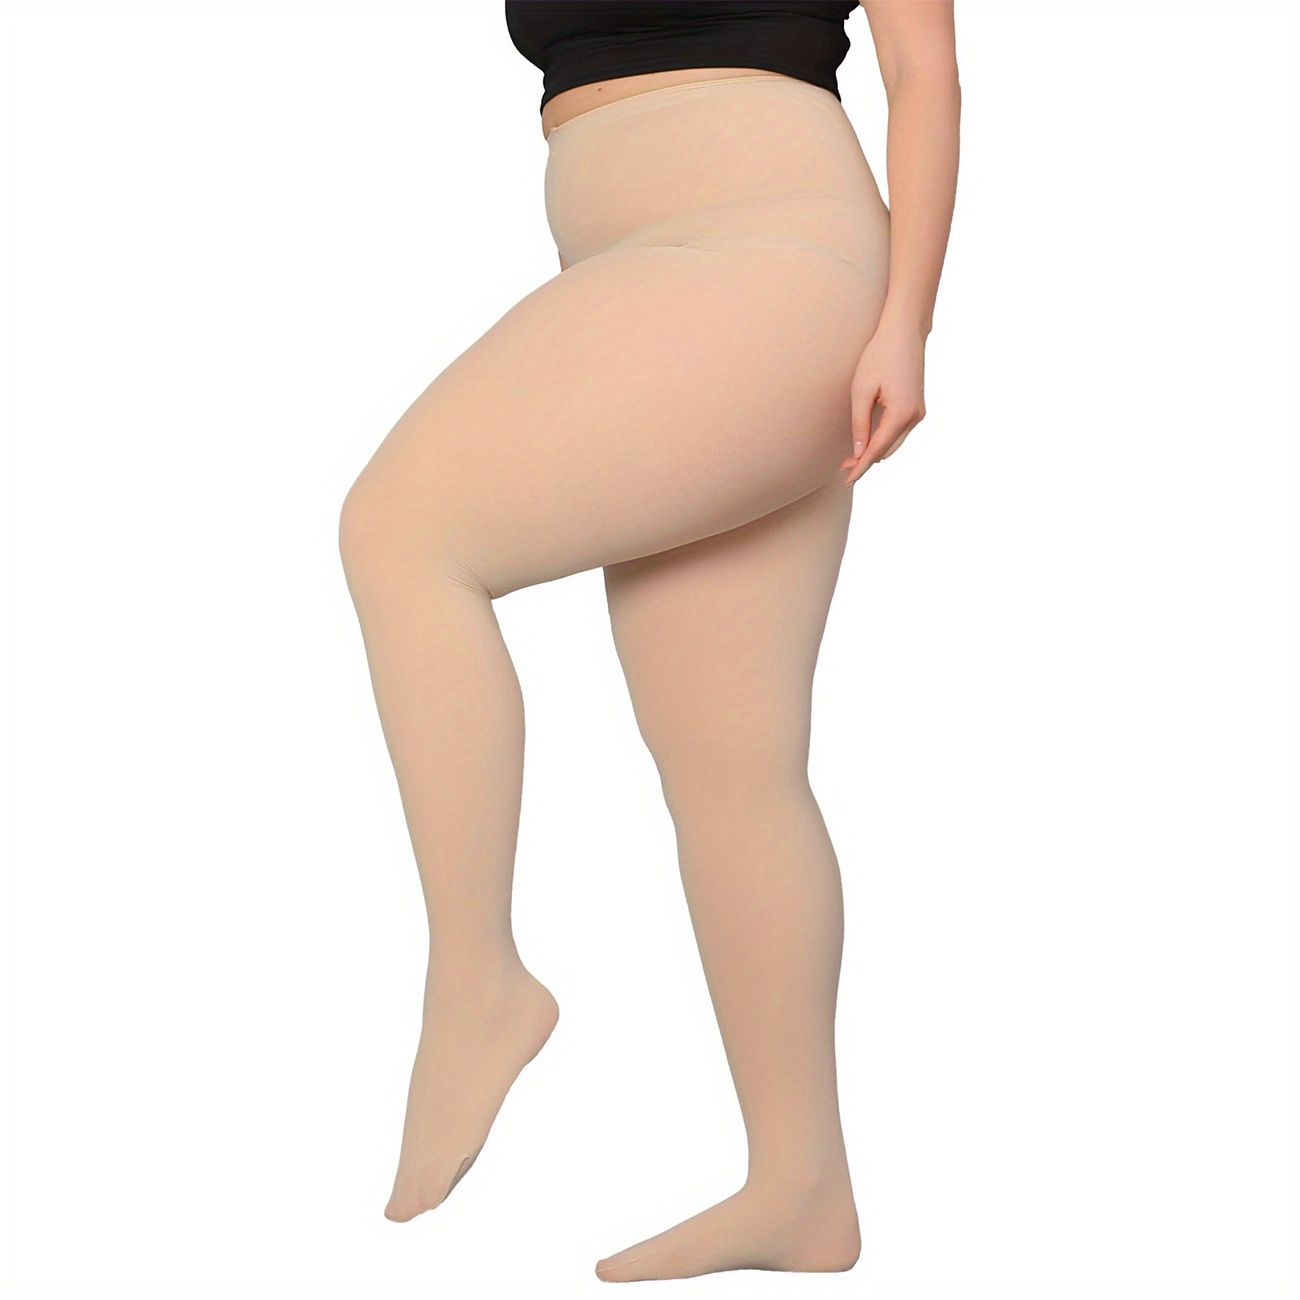  Plus Size Tights For Women High Waist Semi Opaque